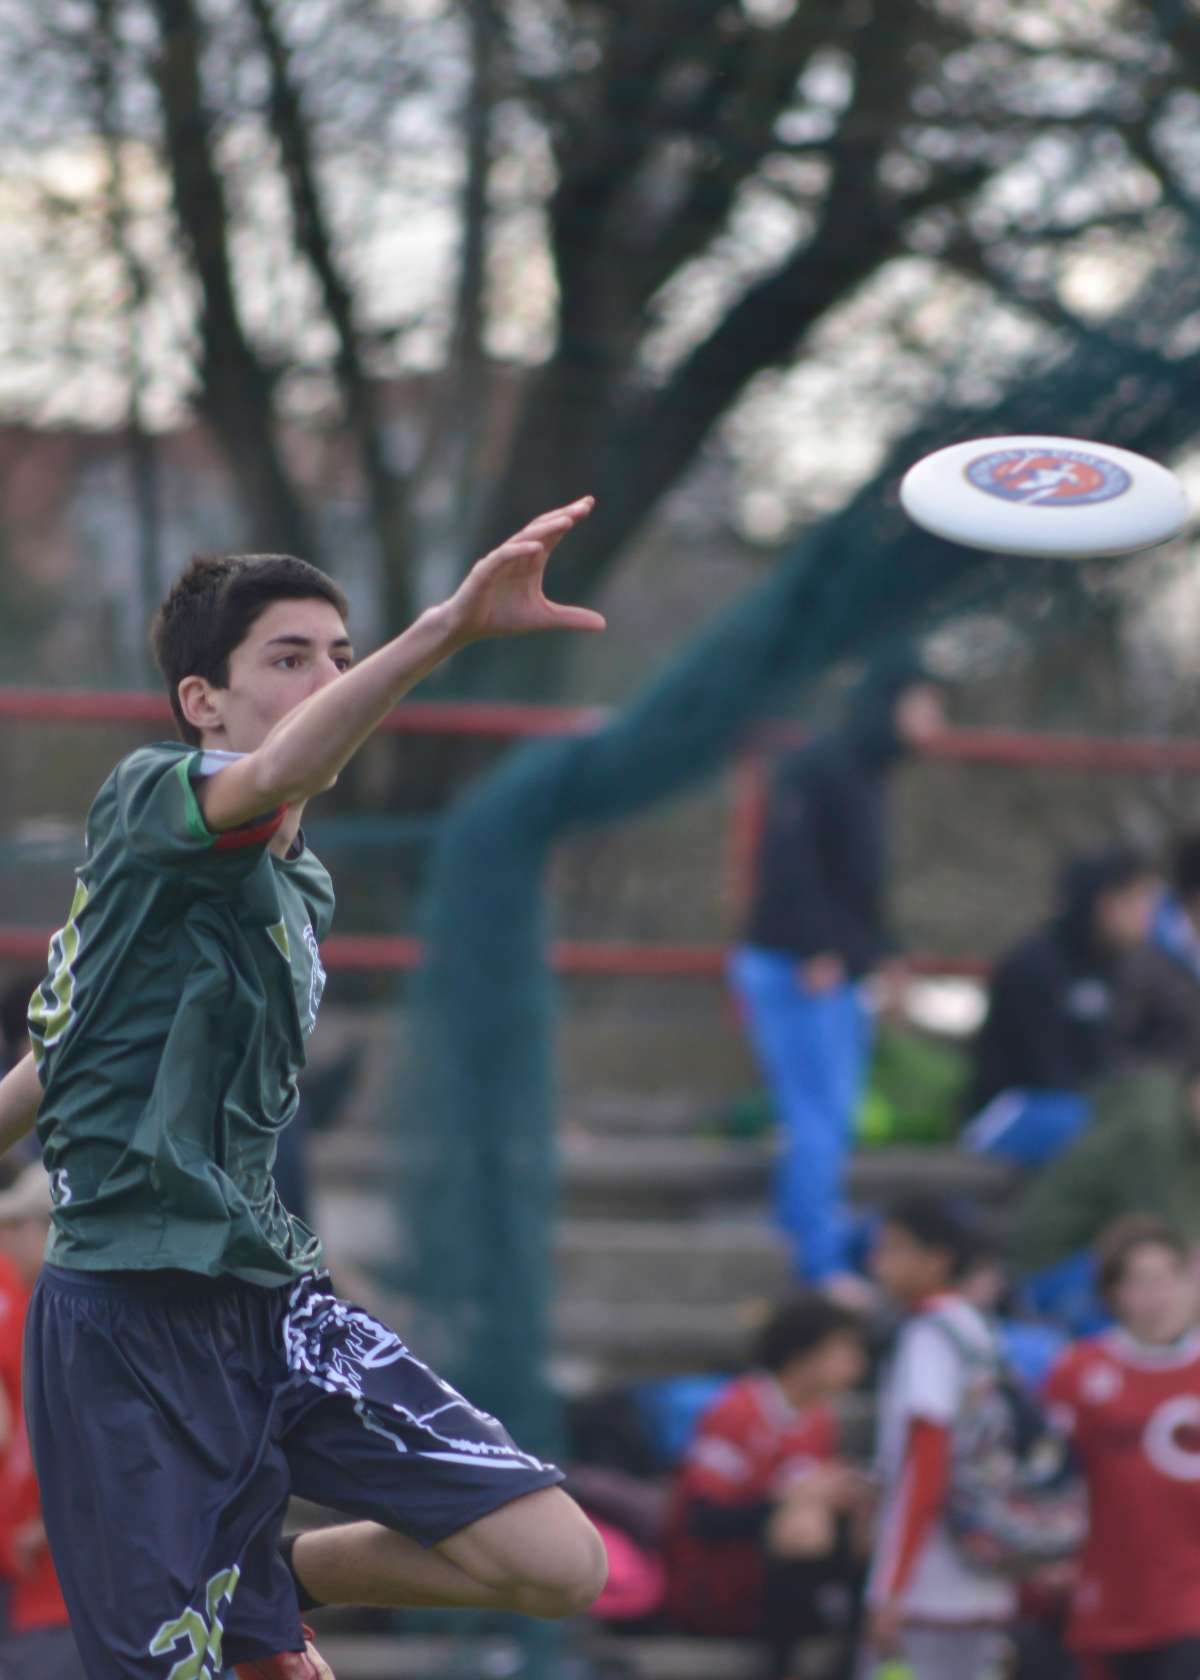 Top 6 Ultimate Frisbee Drills Every Beginner Needs to Know